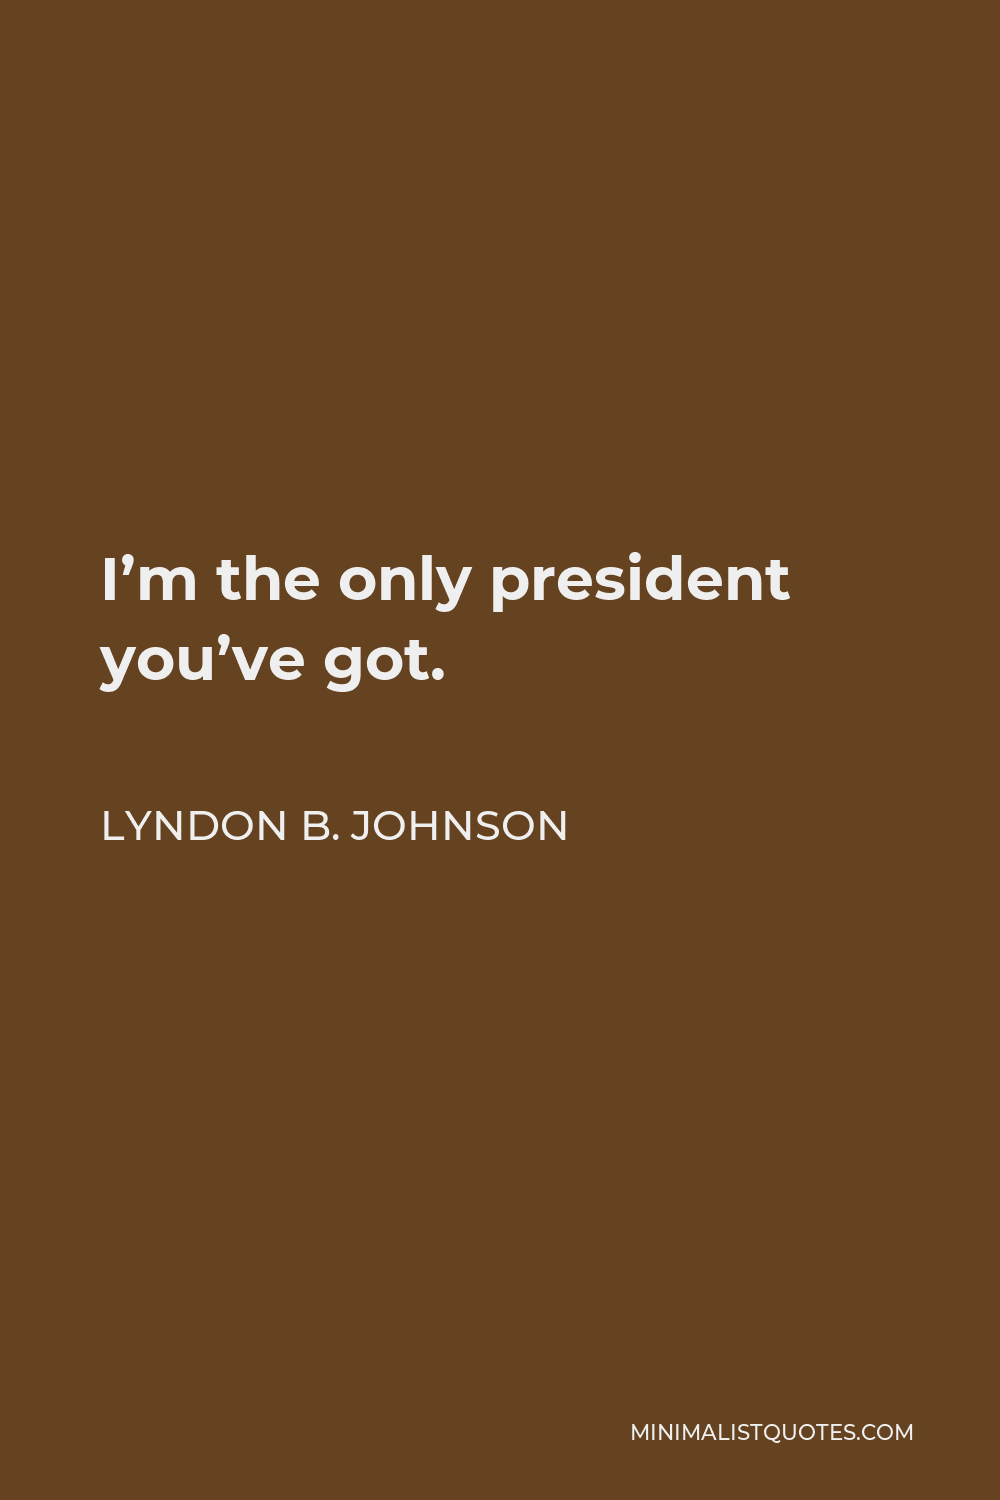 Lyndon B. Johnson Quote - I’m the only president you’ve got.